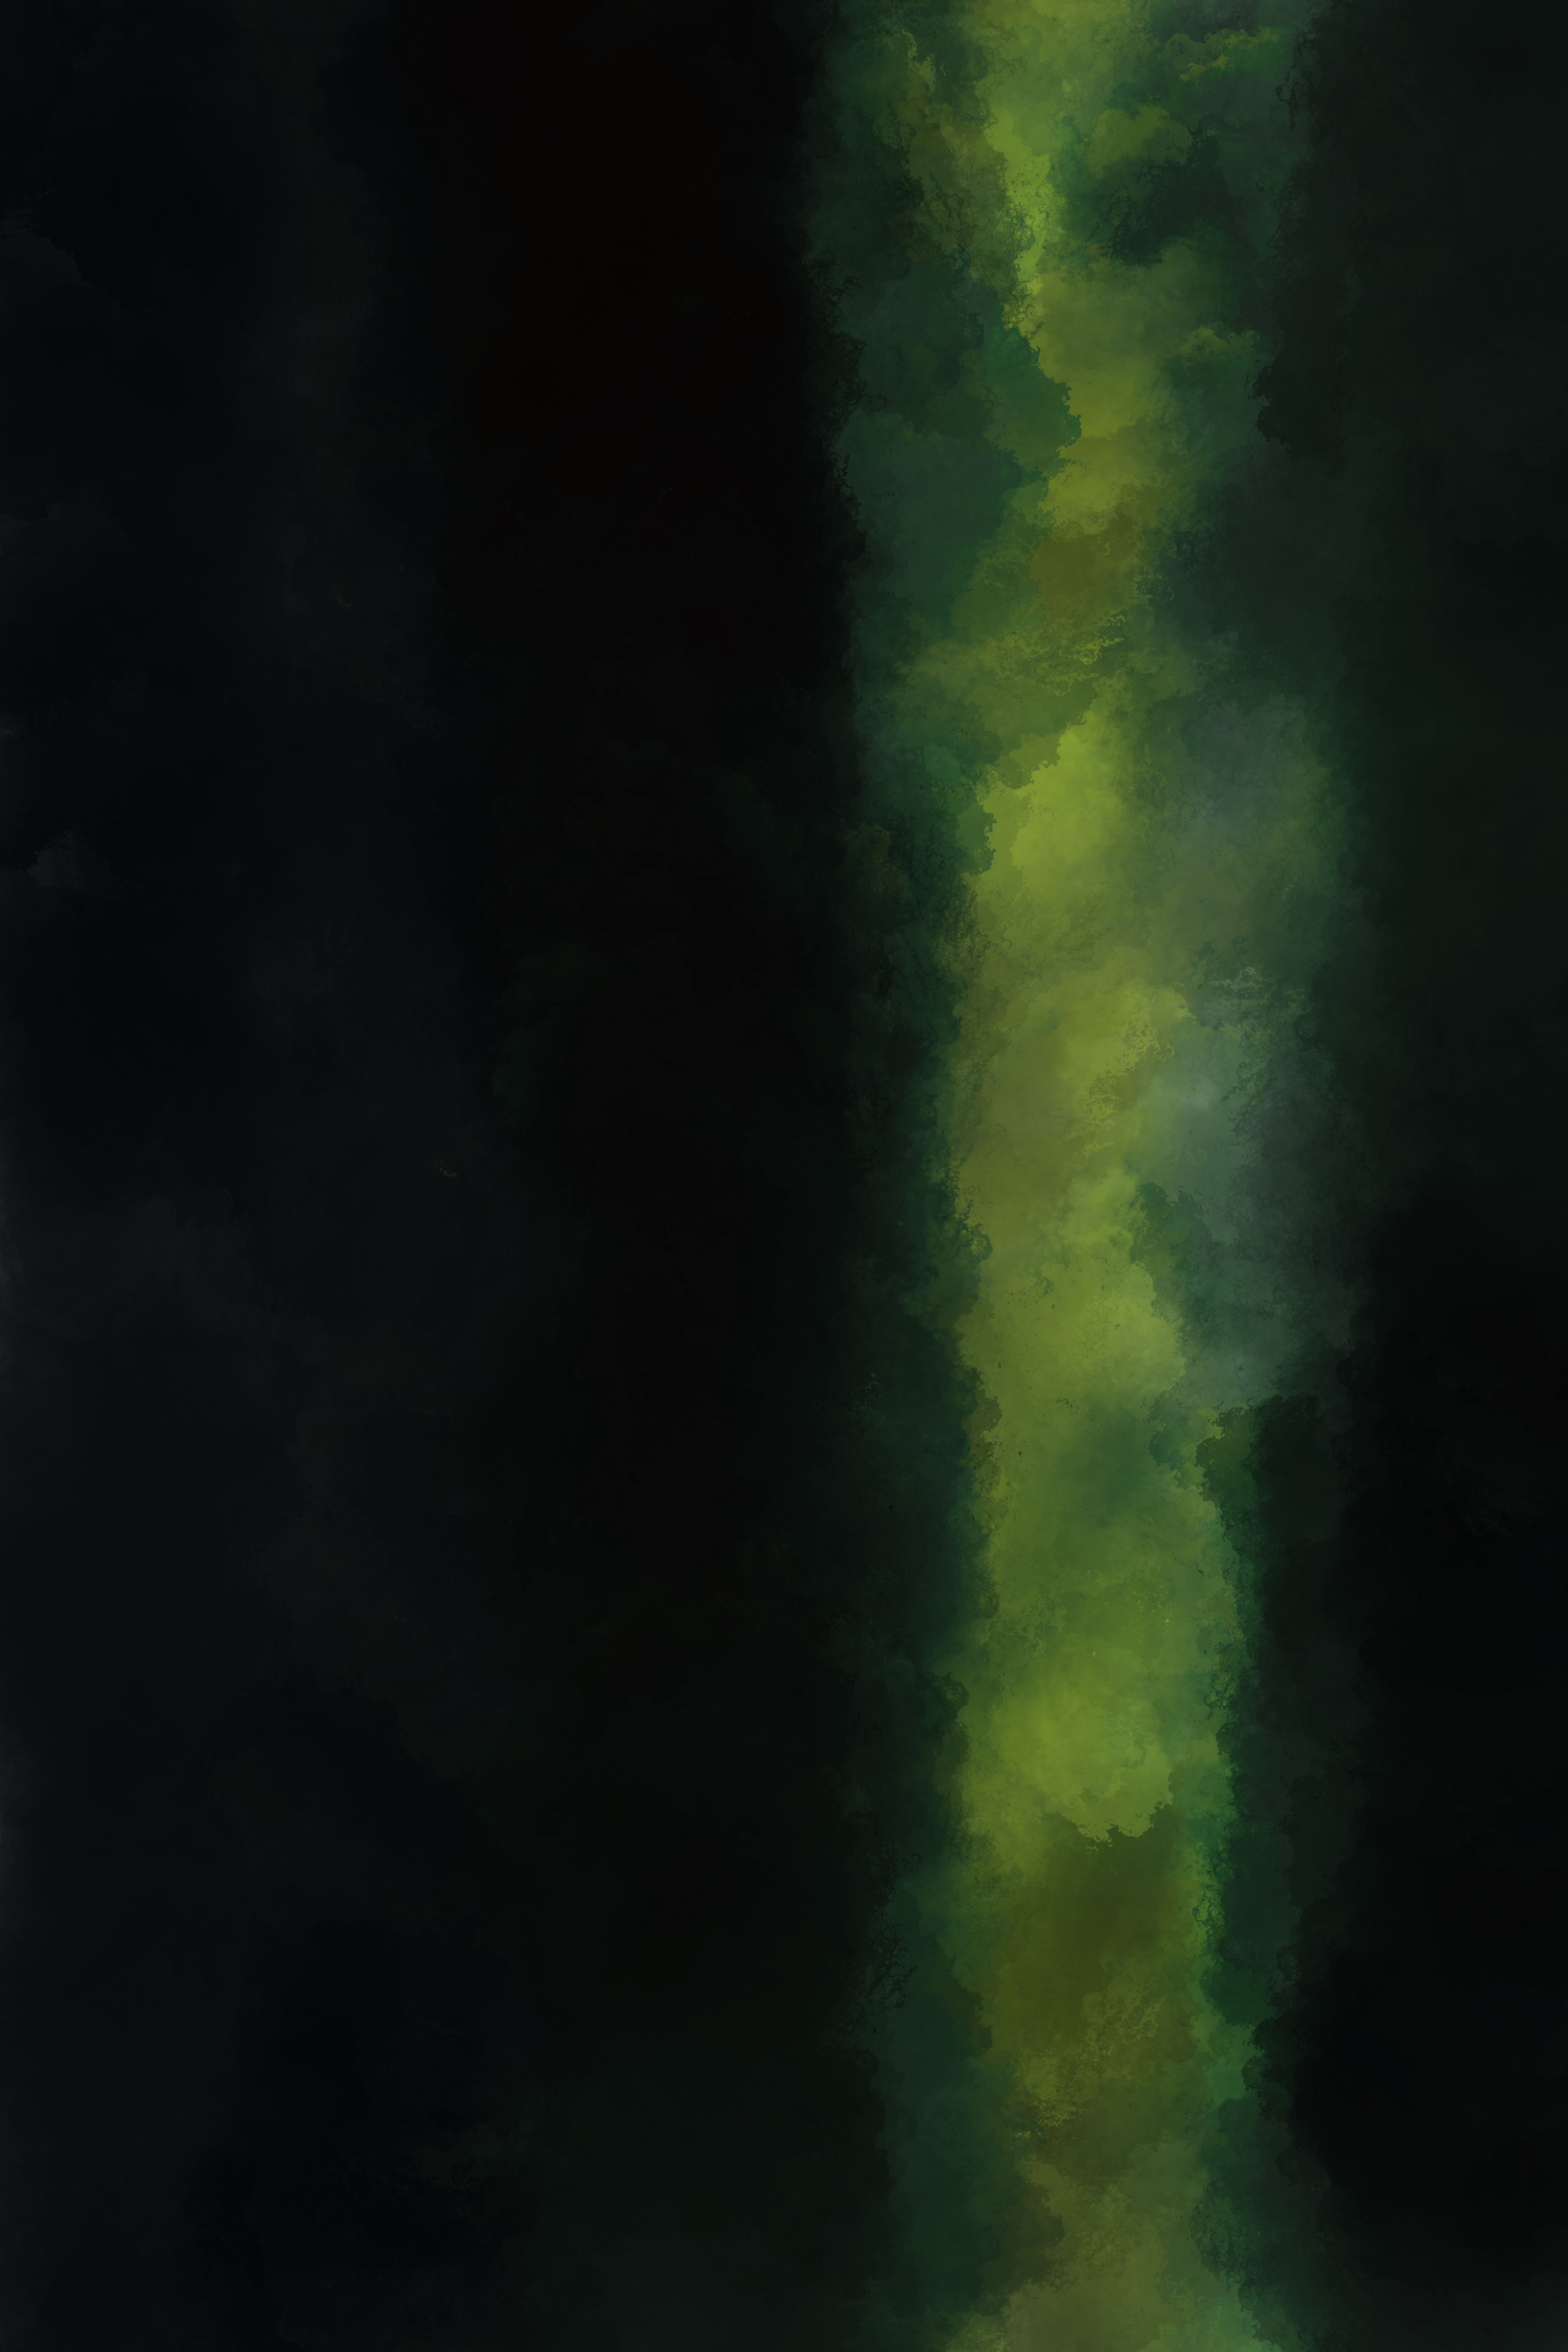 On the right, a spiraled green horizontal line on a dark background.